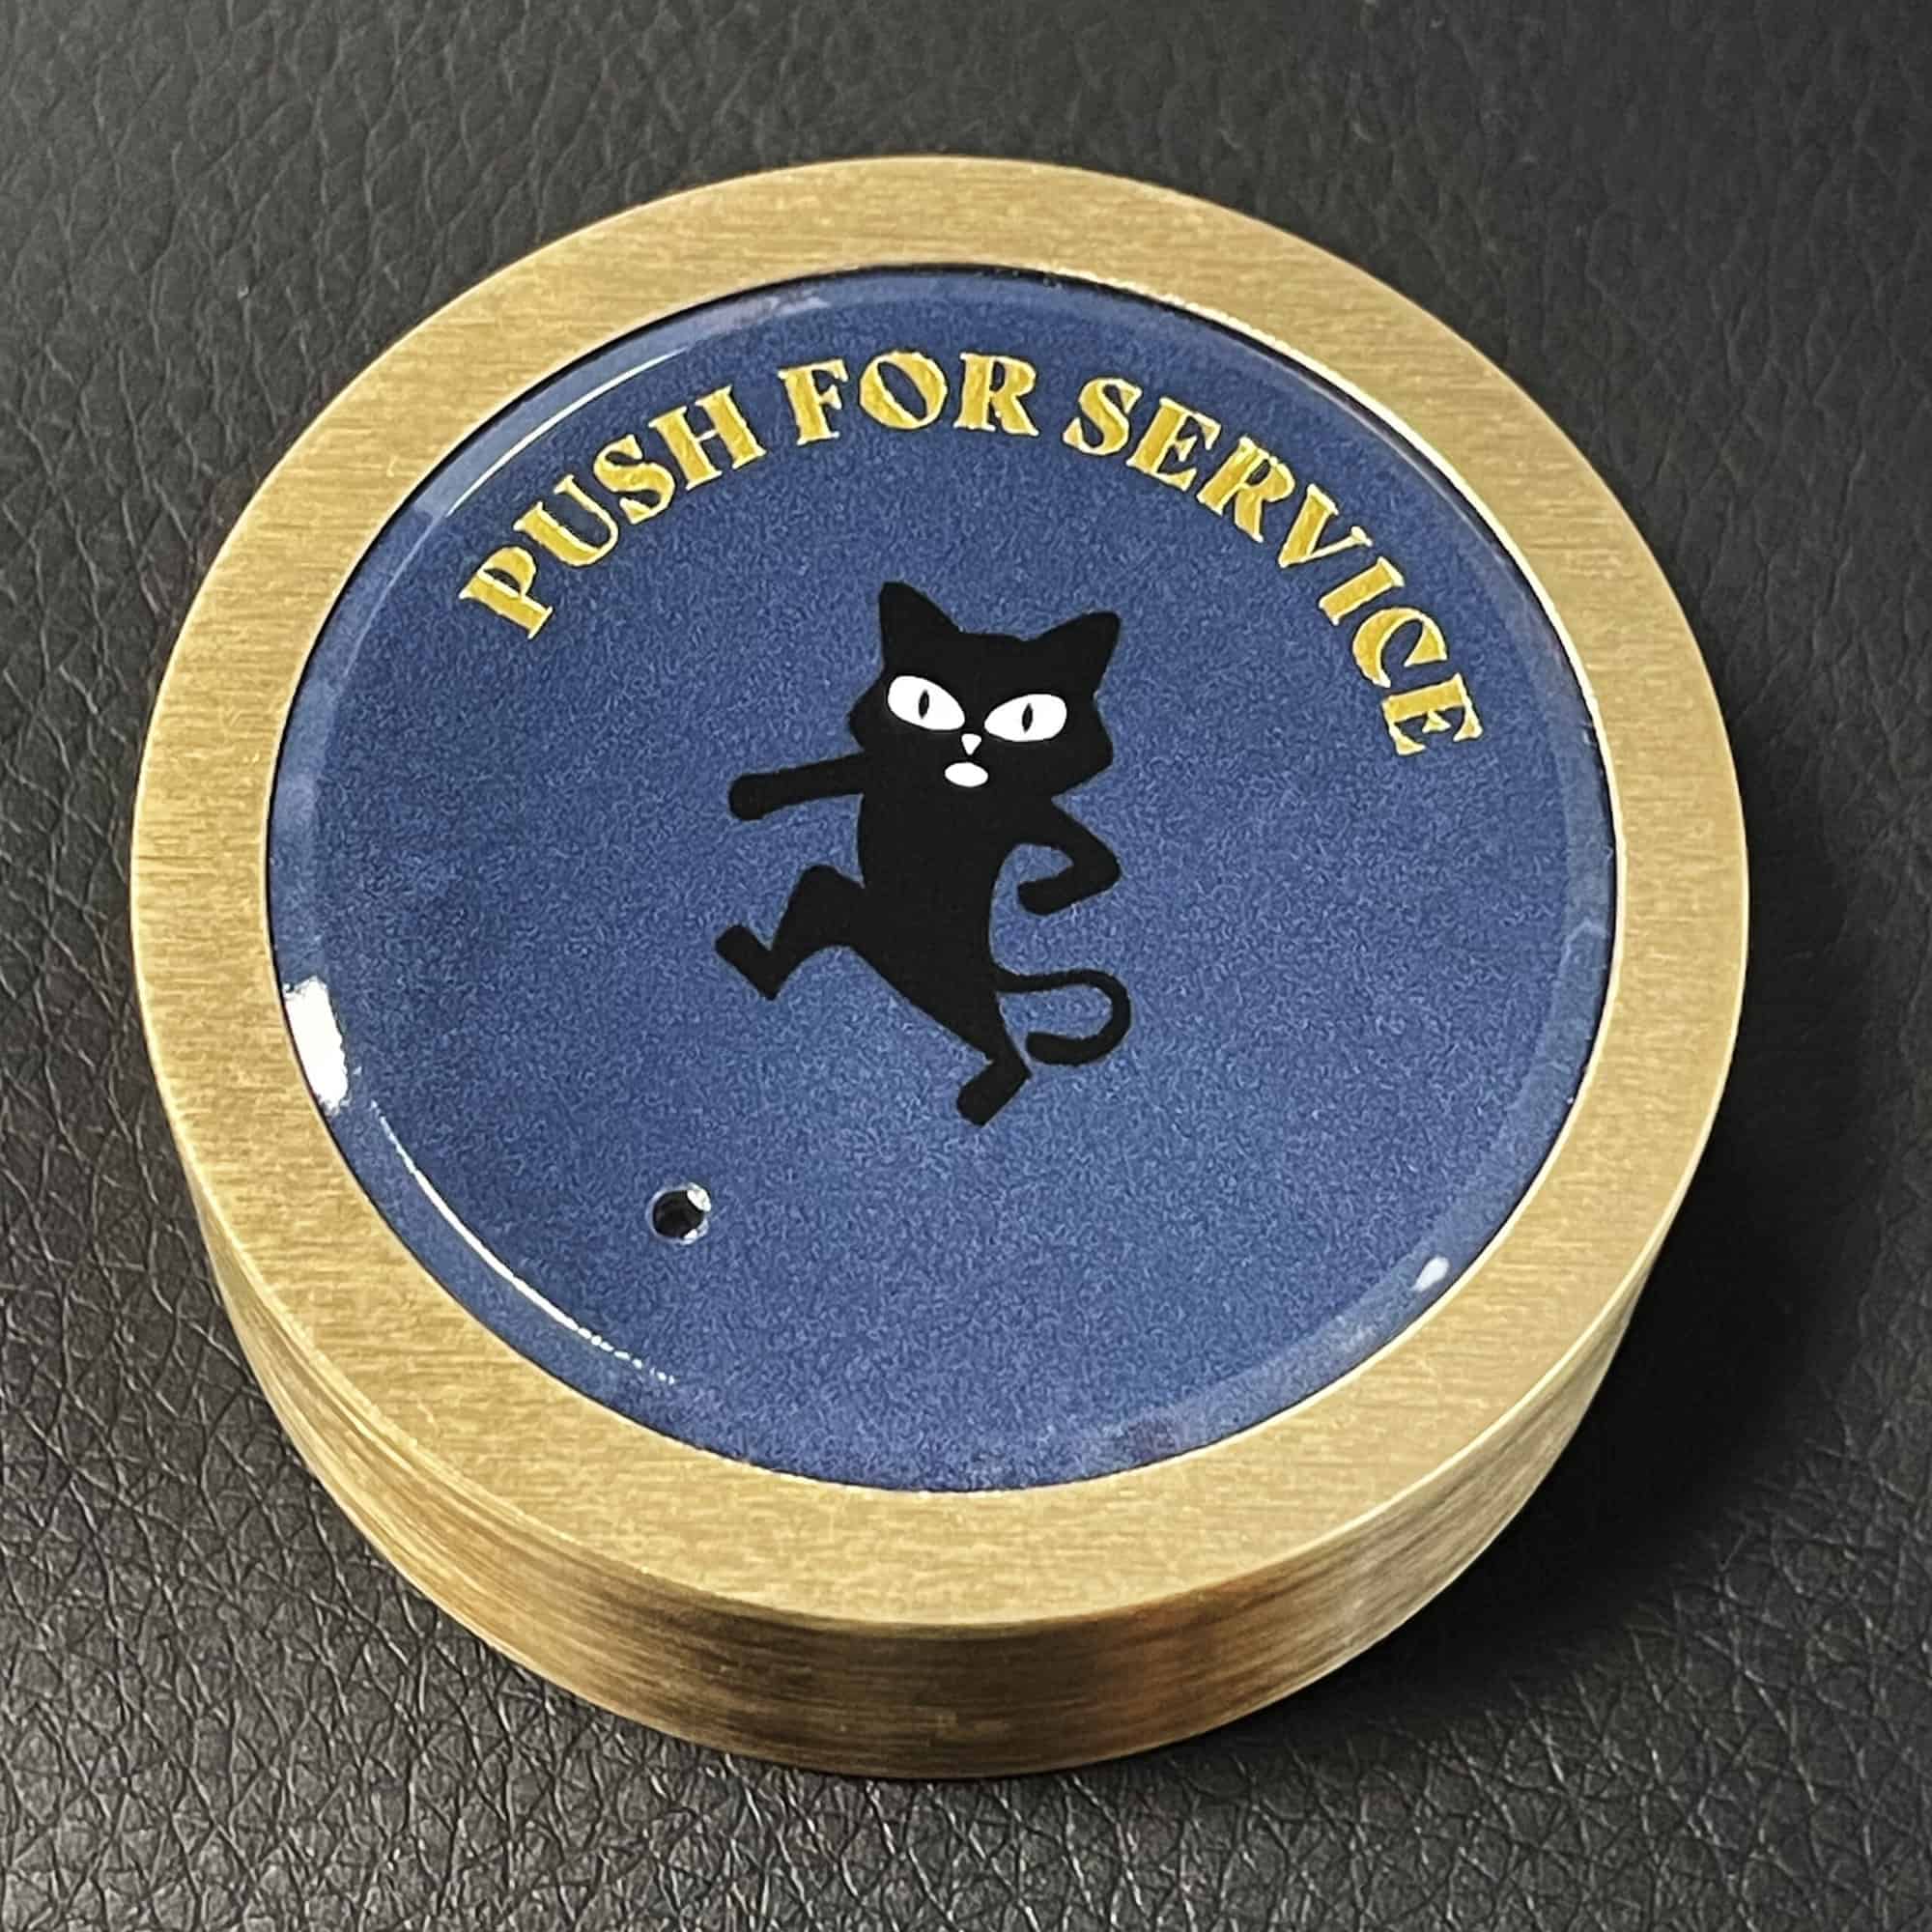 Customised Dinggly button for Black Cat Club